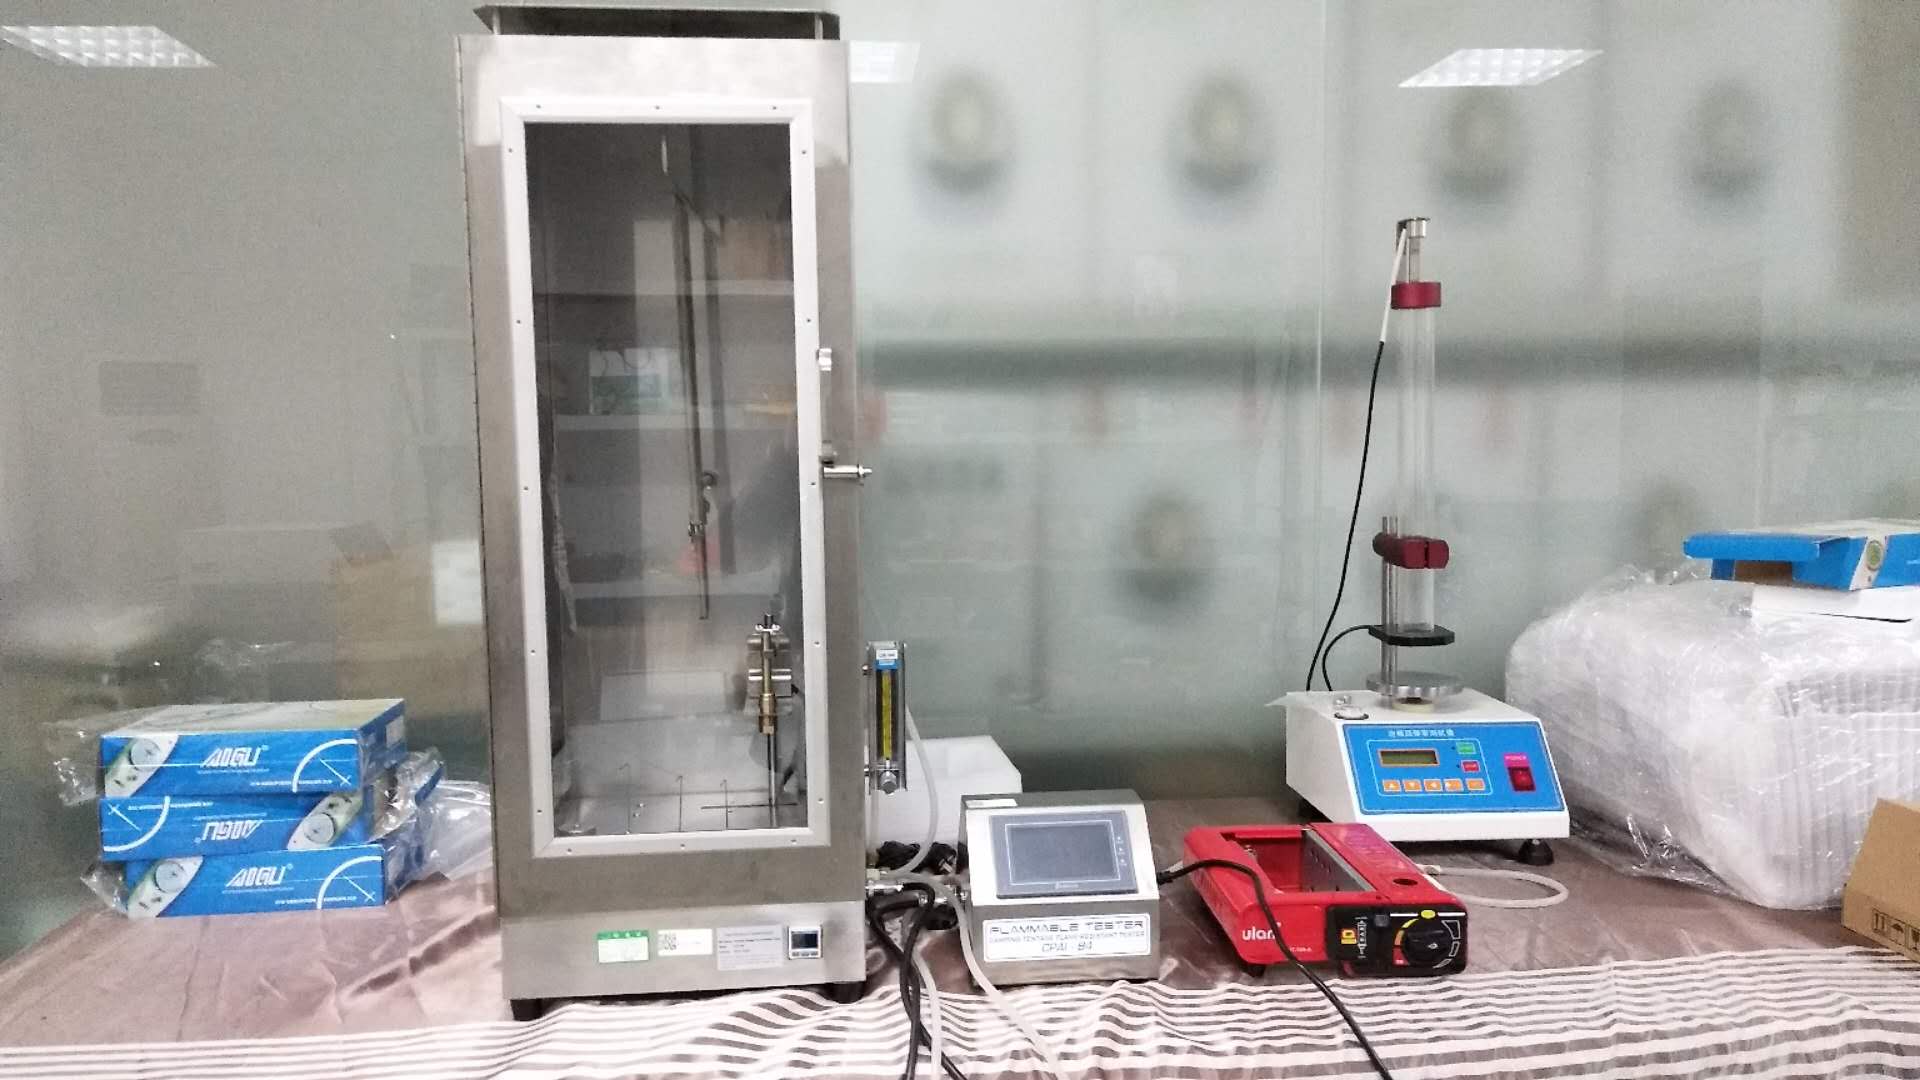 Vertical Flammability Chamber for measuring the vertical flame spread of children’s sleepwear, fabrics (fabric burn test), other textile materials.